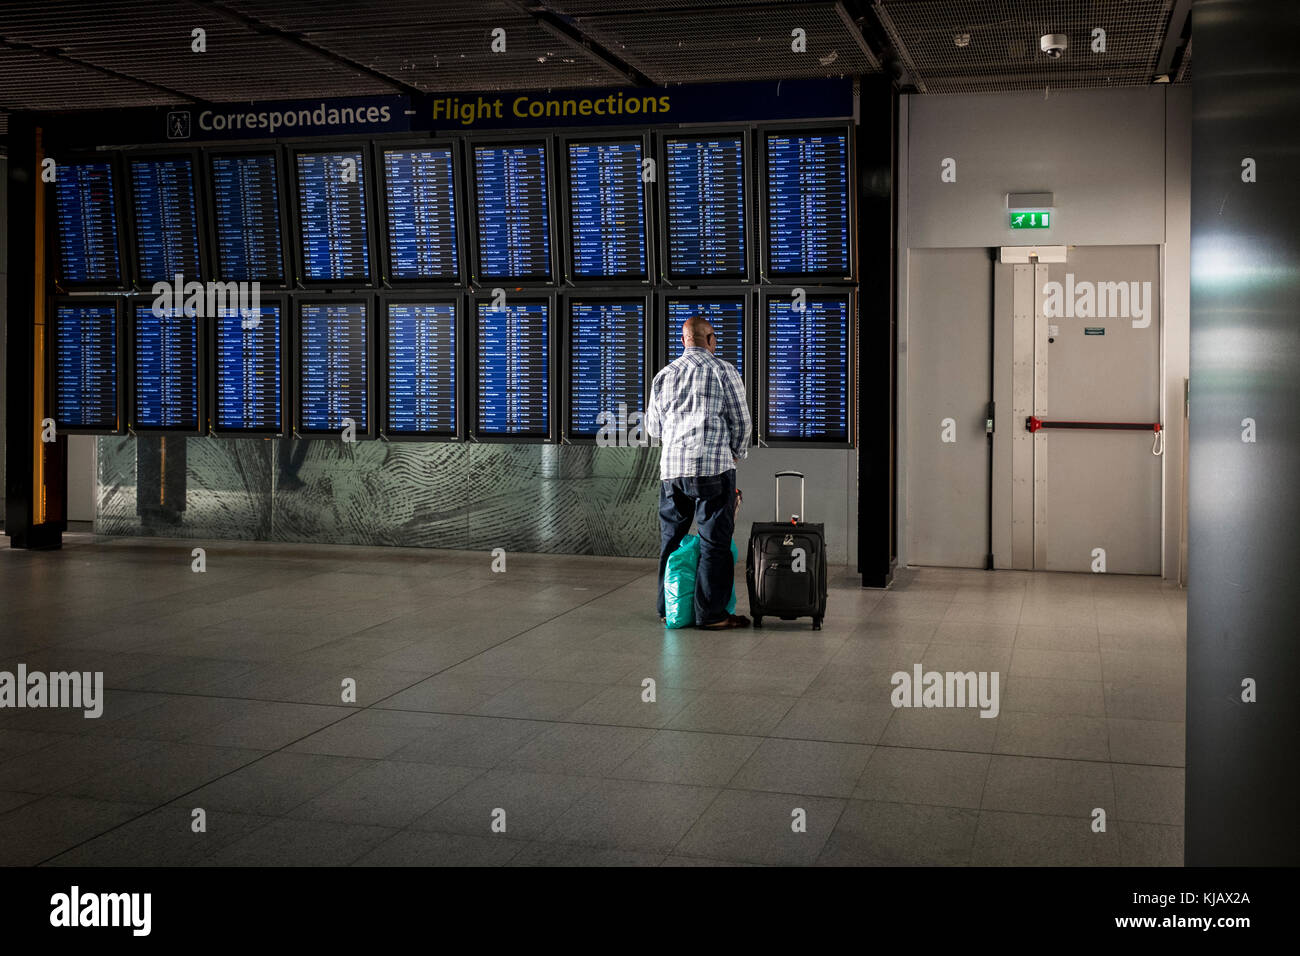 A man looks at the flight connections board at Paris Charles de Gaulle, aka Roissy, Airport in France. Stock Photo